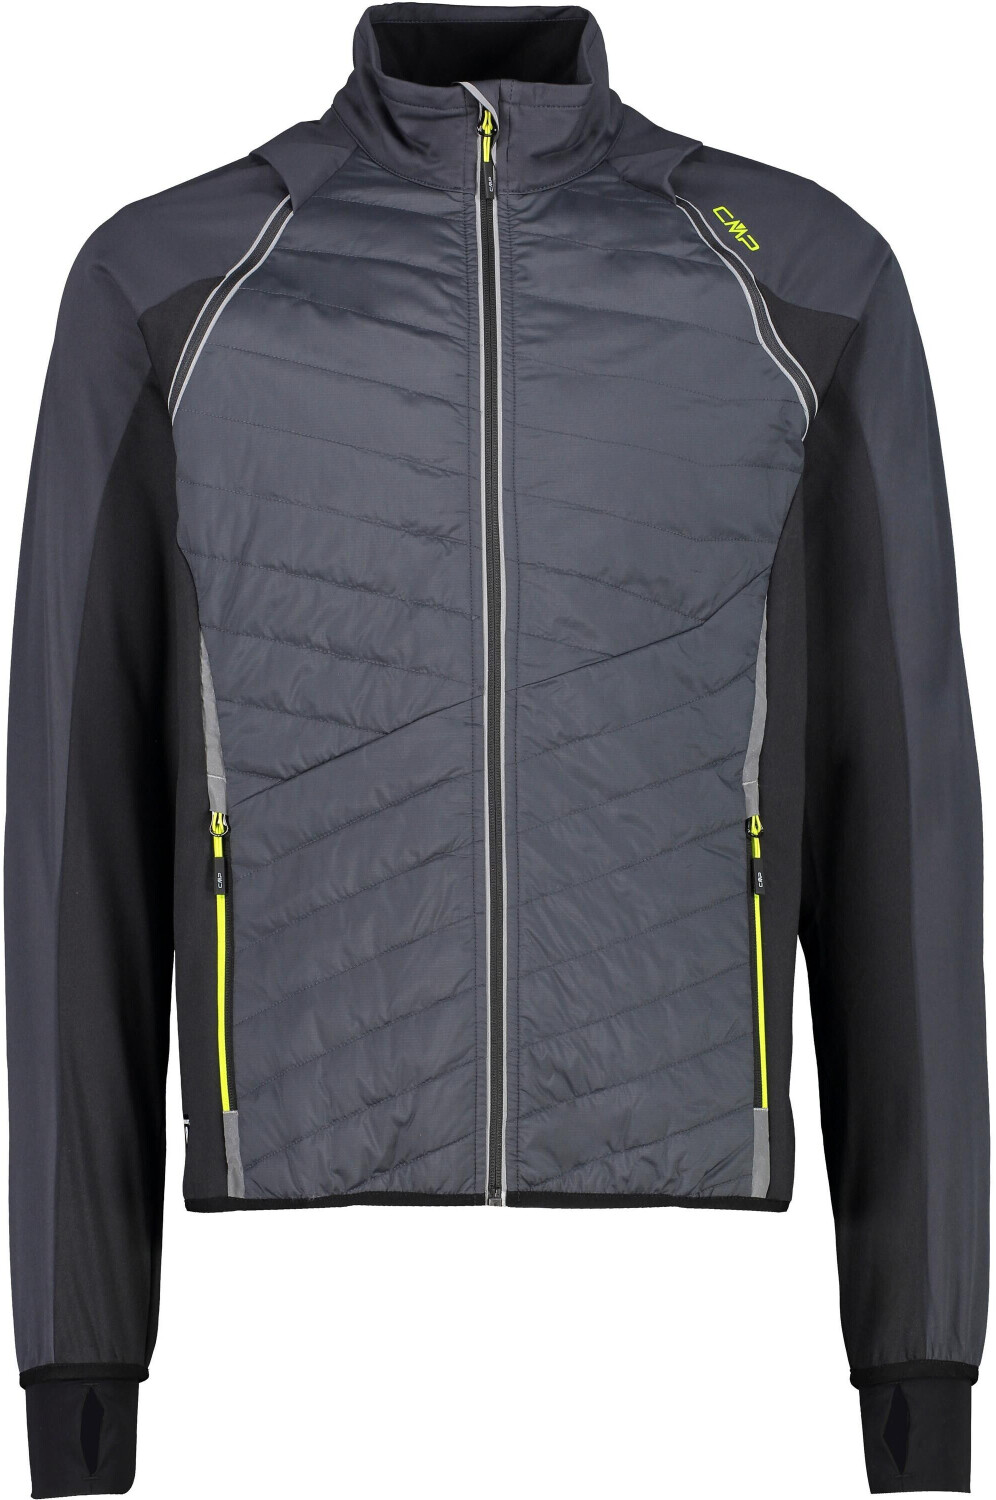 Buy CMP Men\'s Unlimitech Hybrid jacket with Removable Sleeves from £51.50  (Today) – Best Deals on